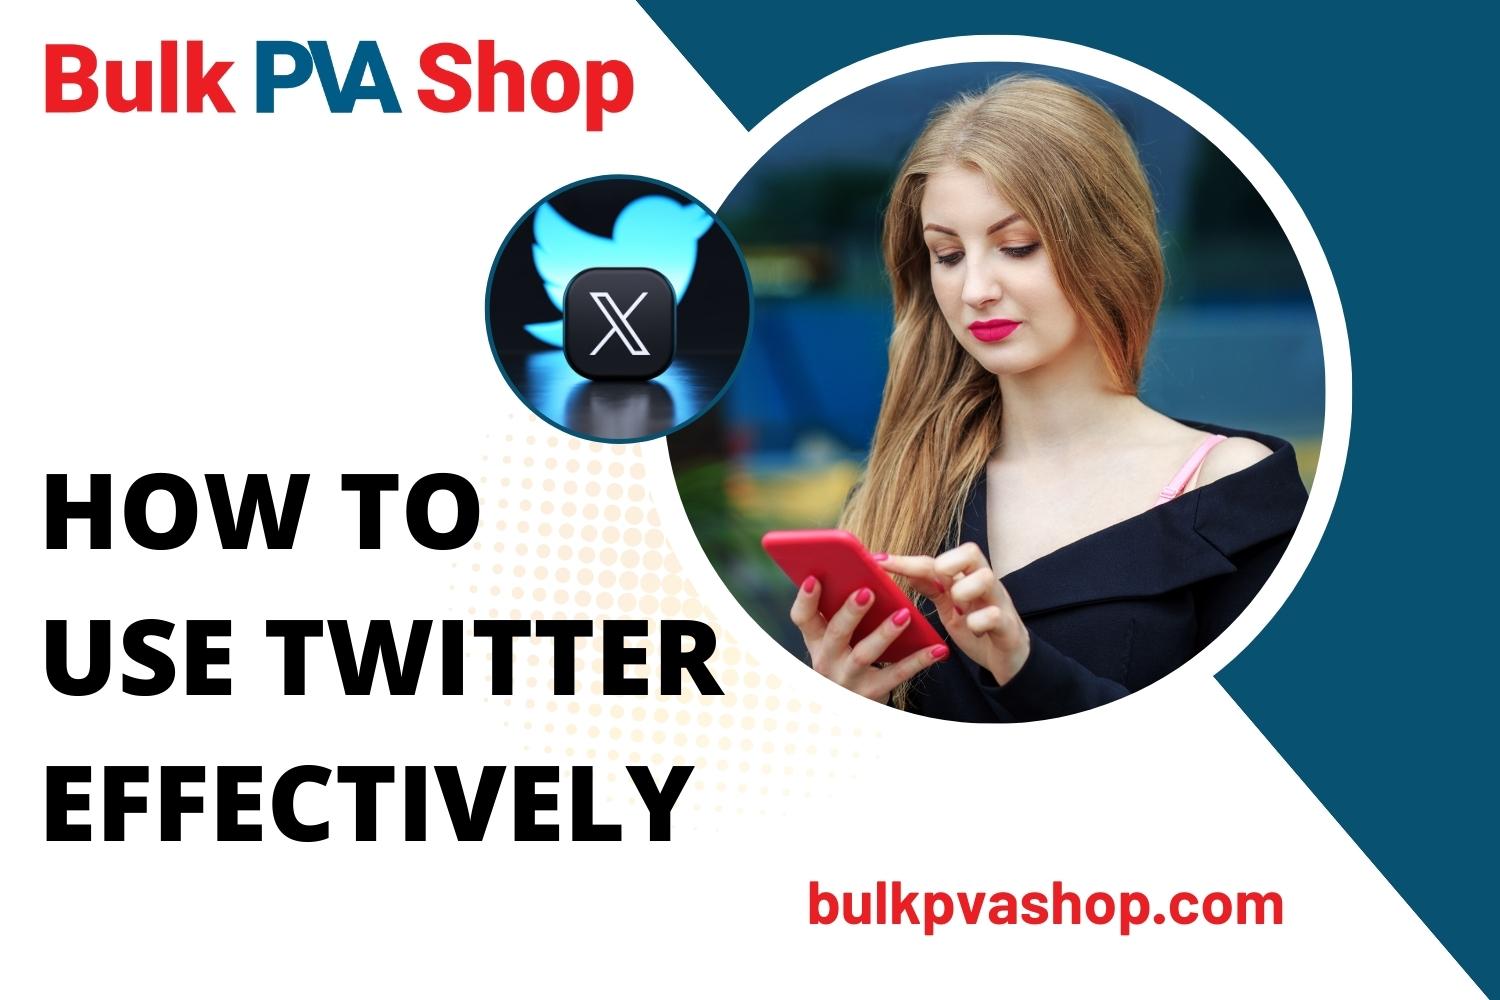 HOW TO USE TWITTER EFFECTIVELY